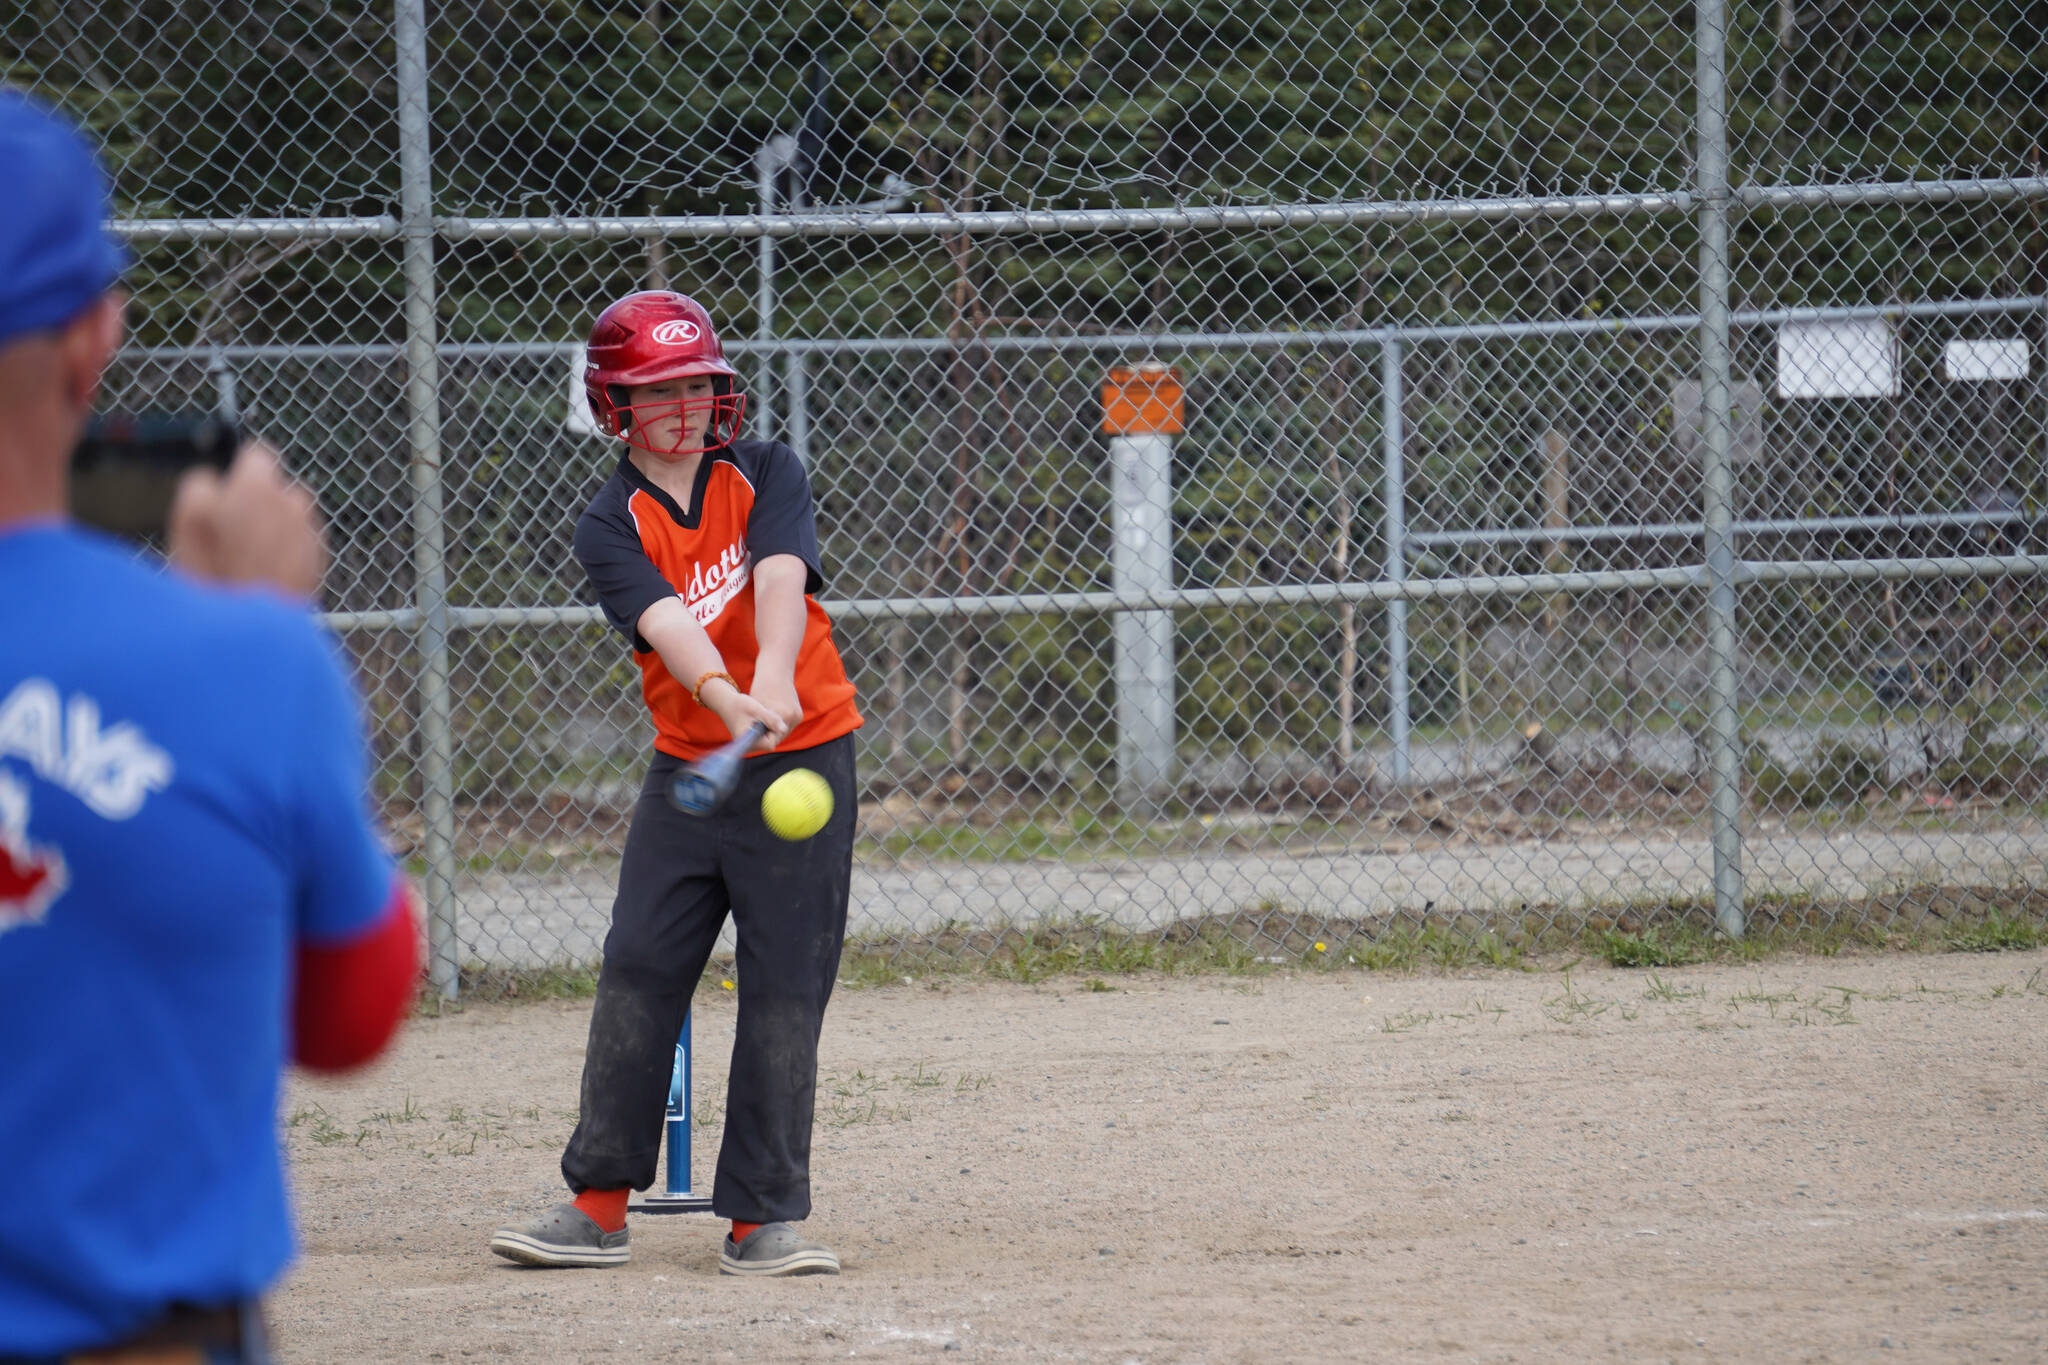 Paxton Katzenberger takes a swing at the ball in Soldotna Little League Challenger Program play at the Little League Fields in Soldotna, Alaska on Saturday, May 20, 2023. (Jake Dye/Peninsula Clarion)